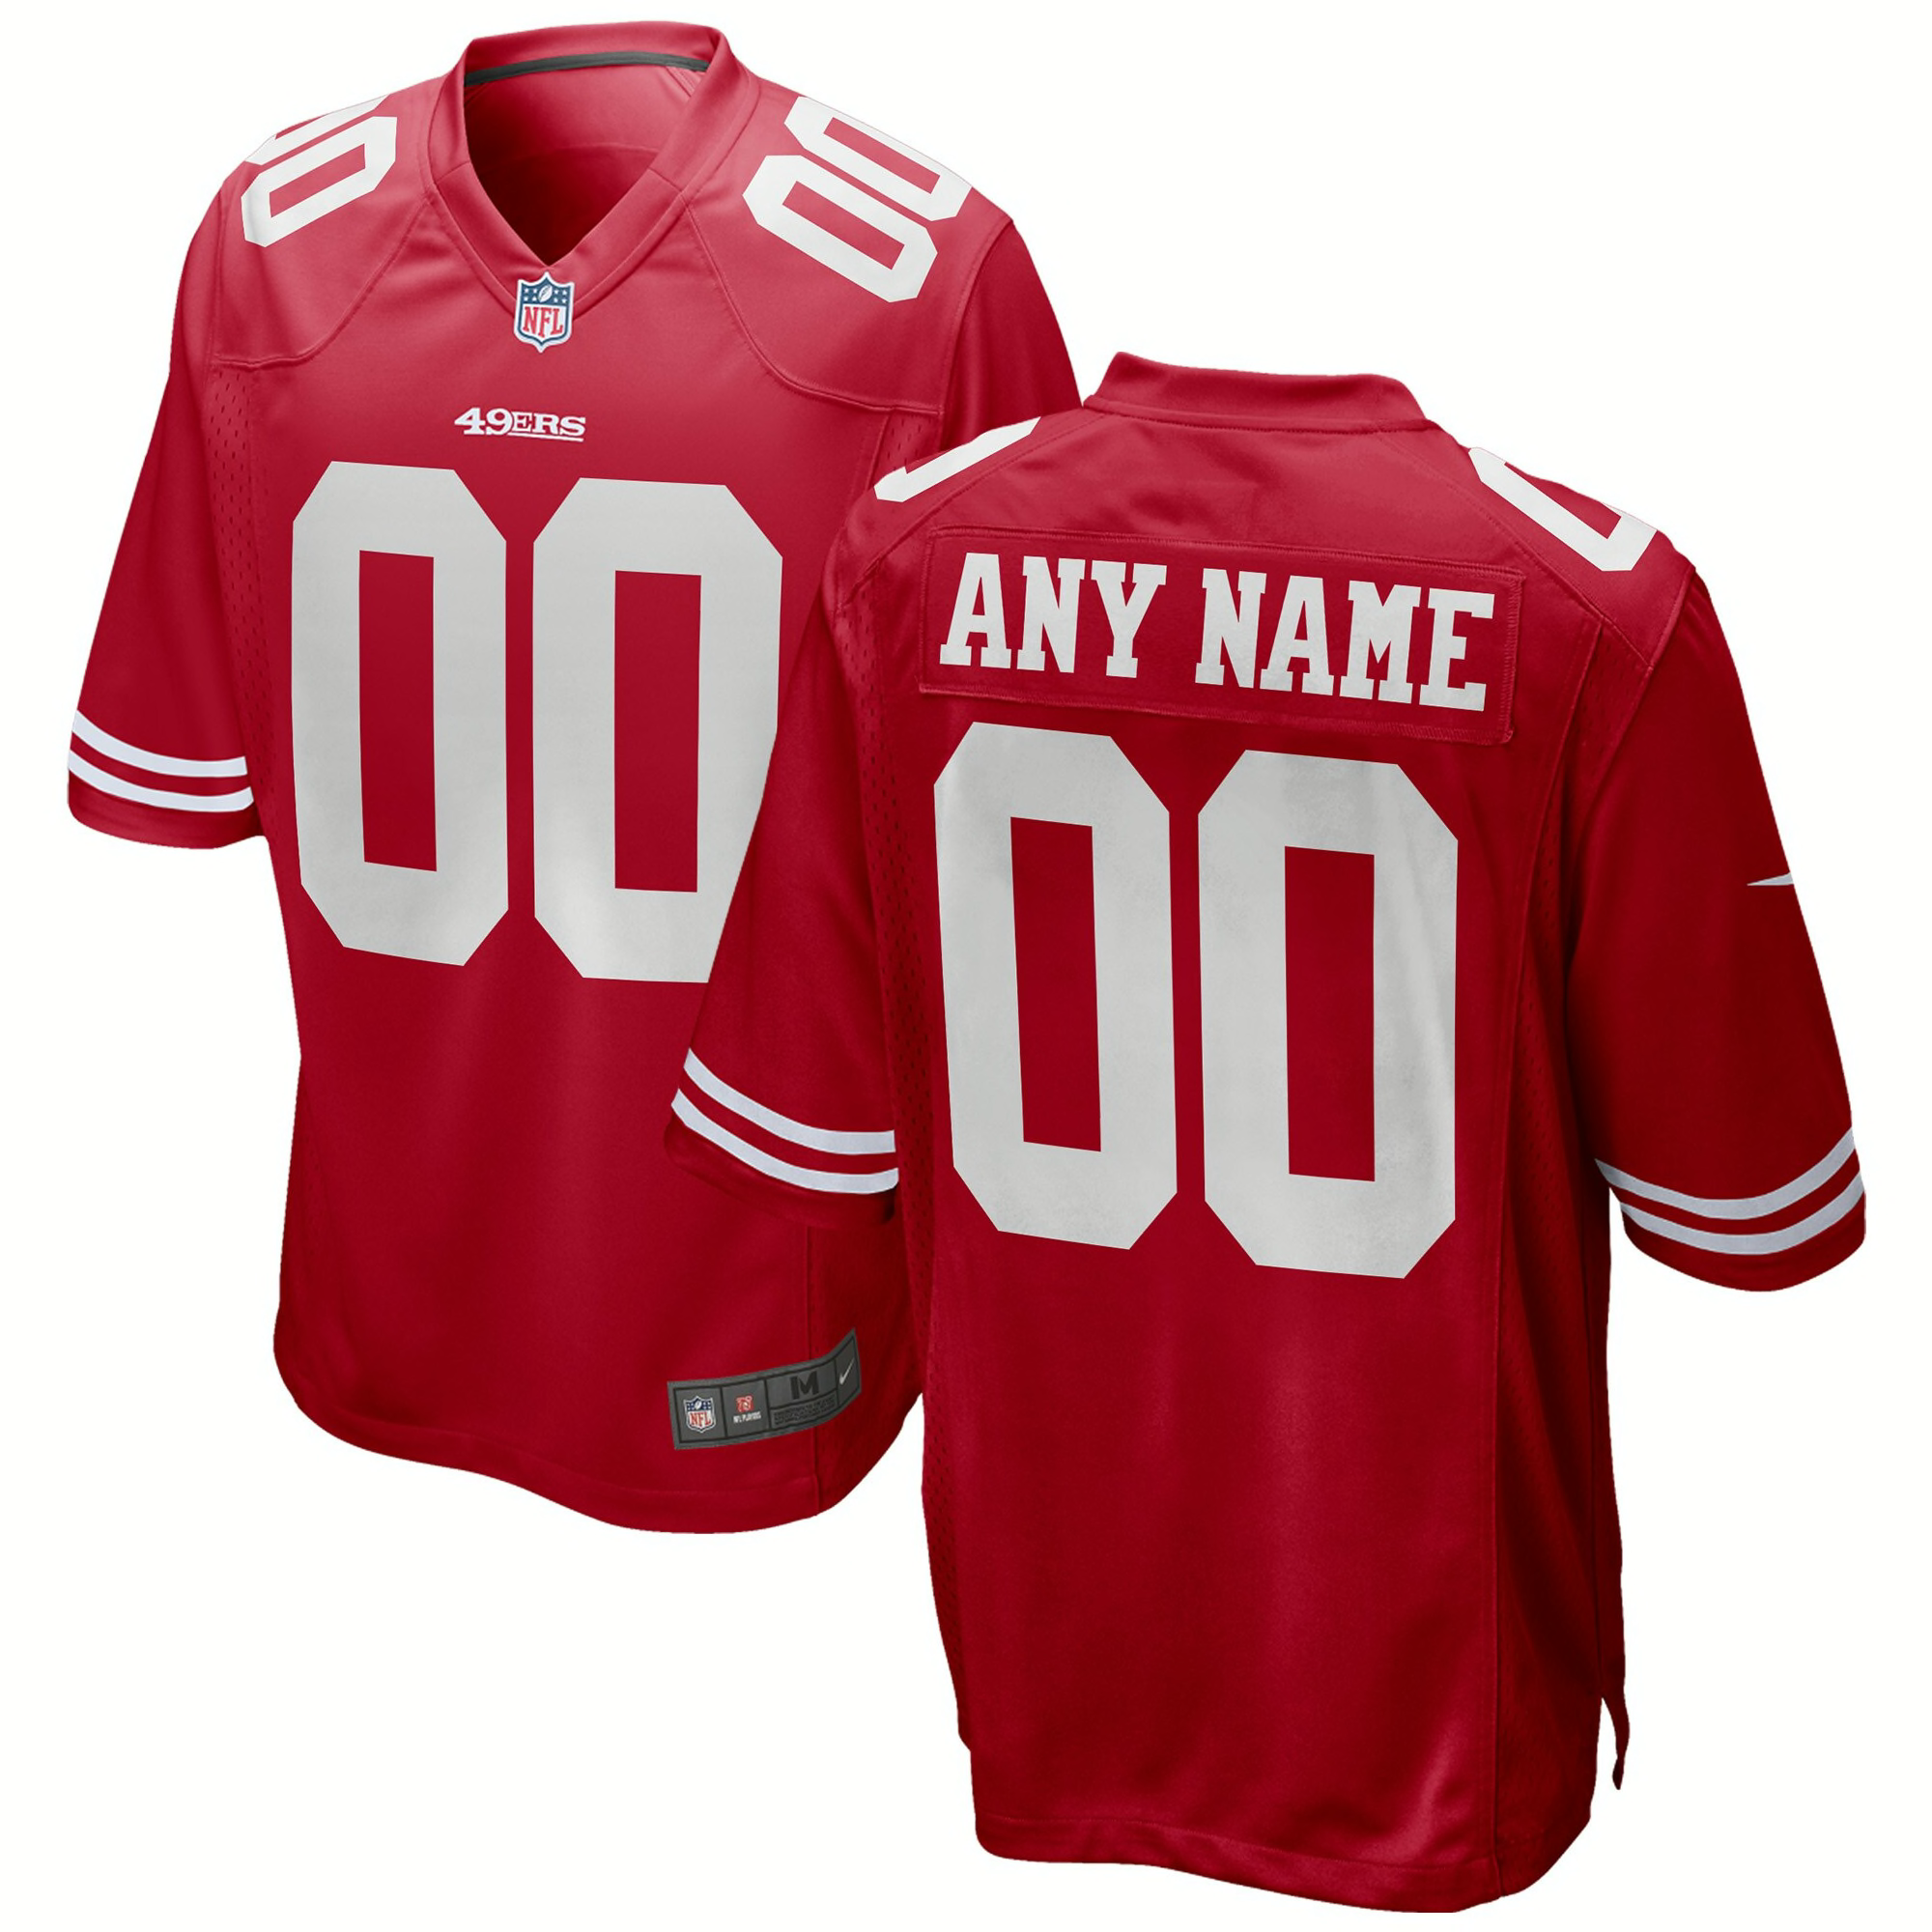 49ers jersey 2020